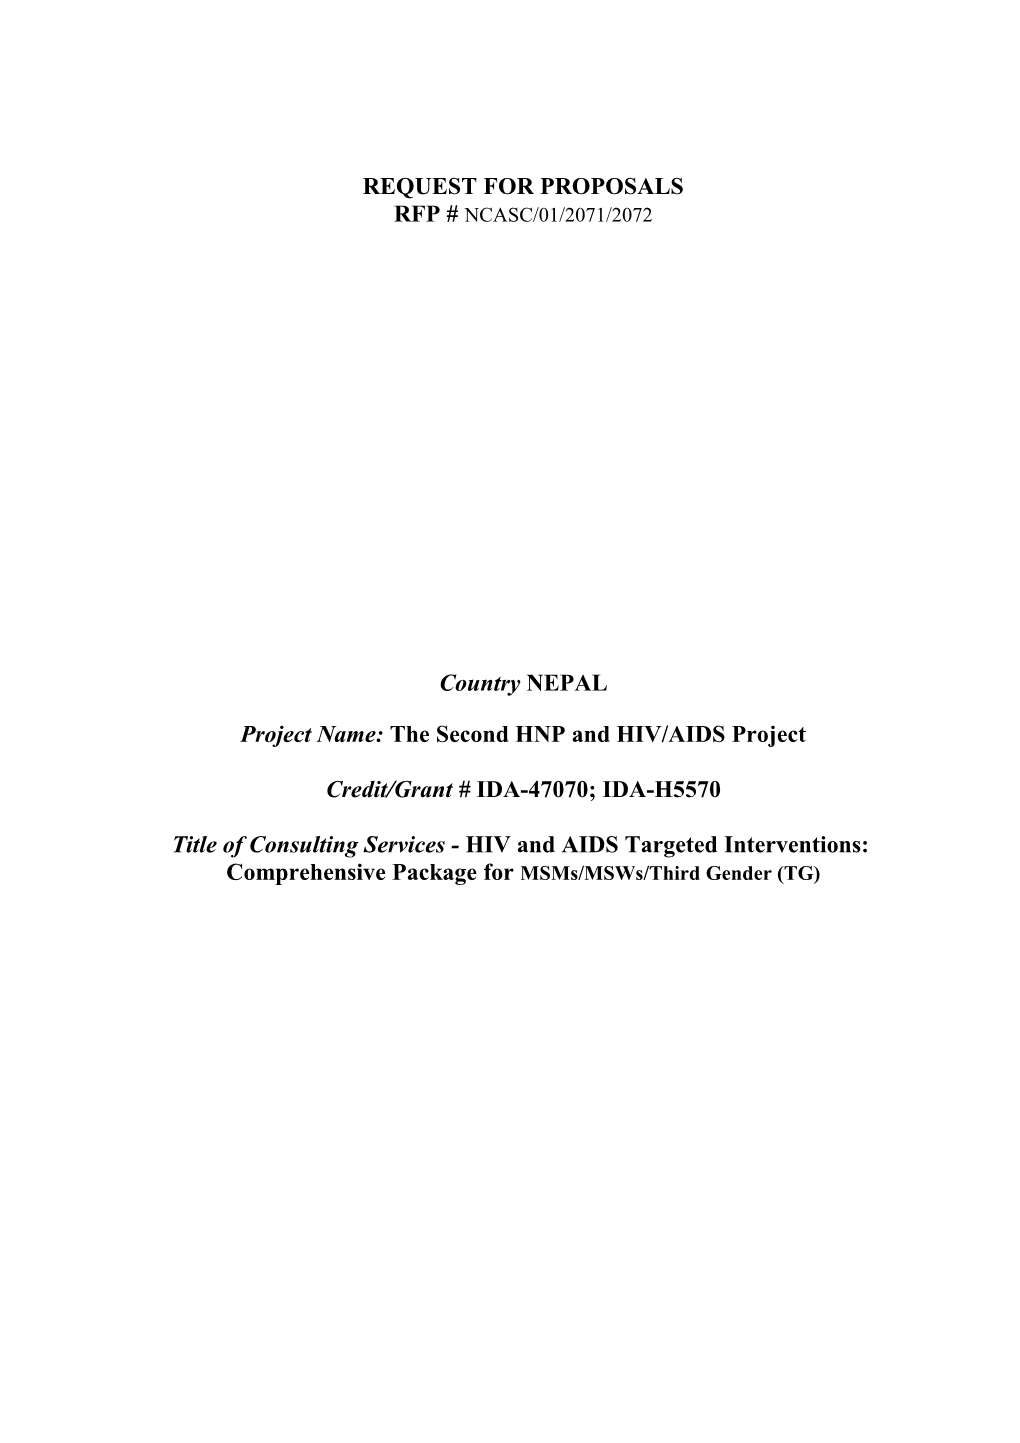 Project Name: the Second HNP and HIV/AIDS Project